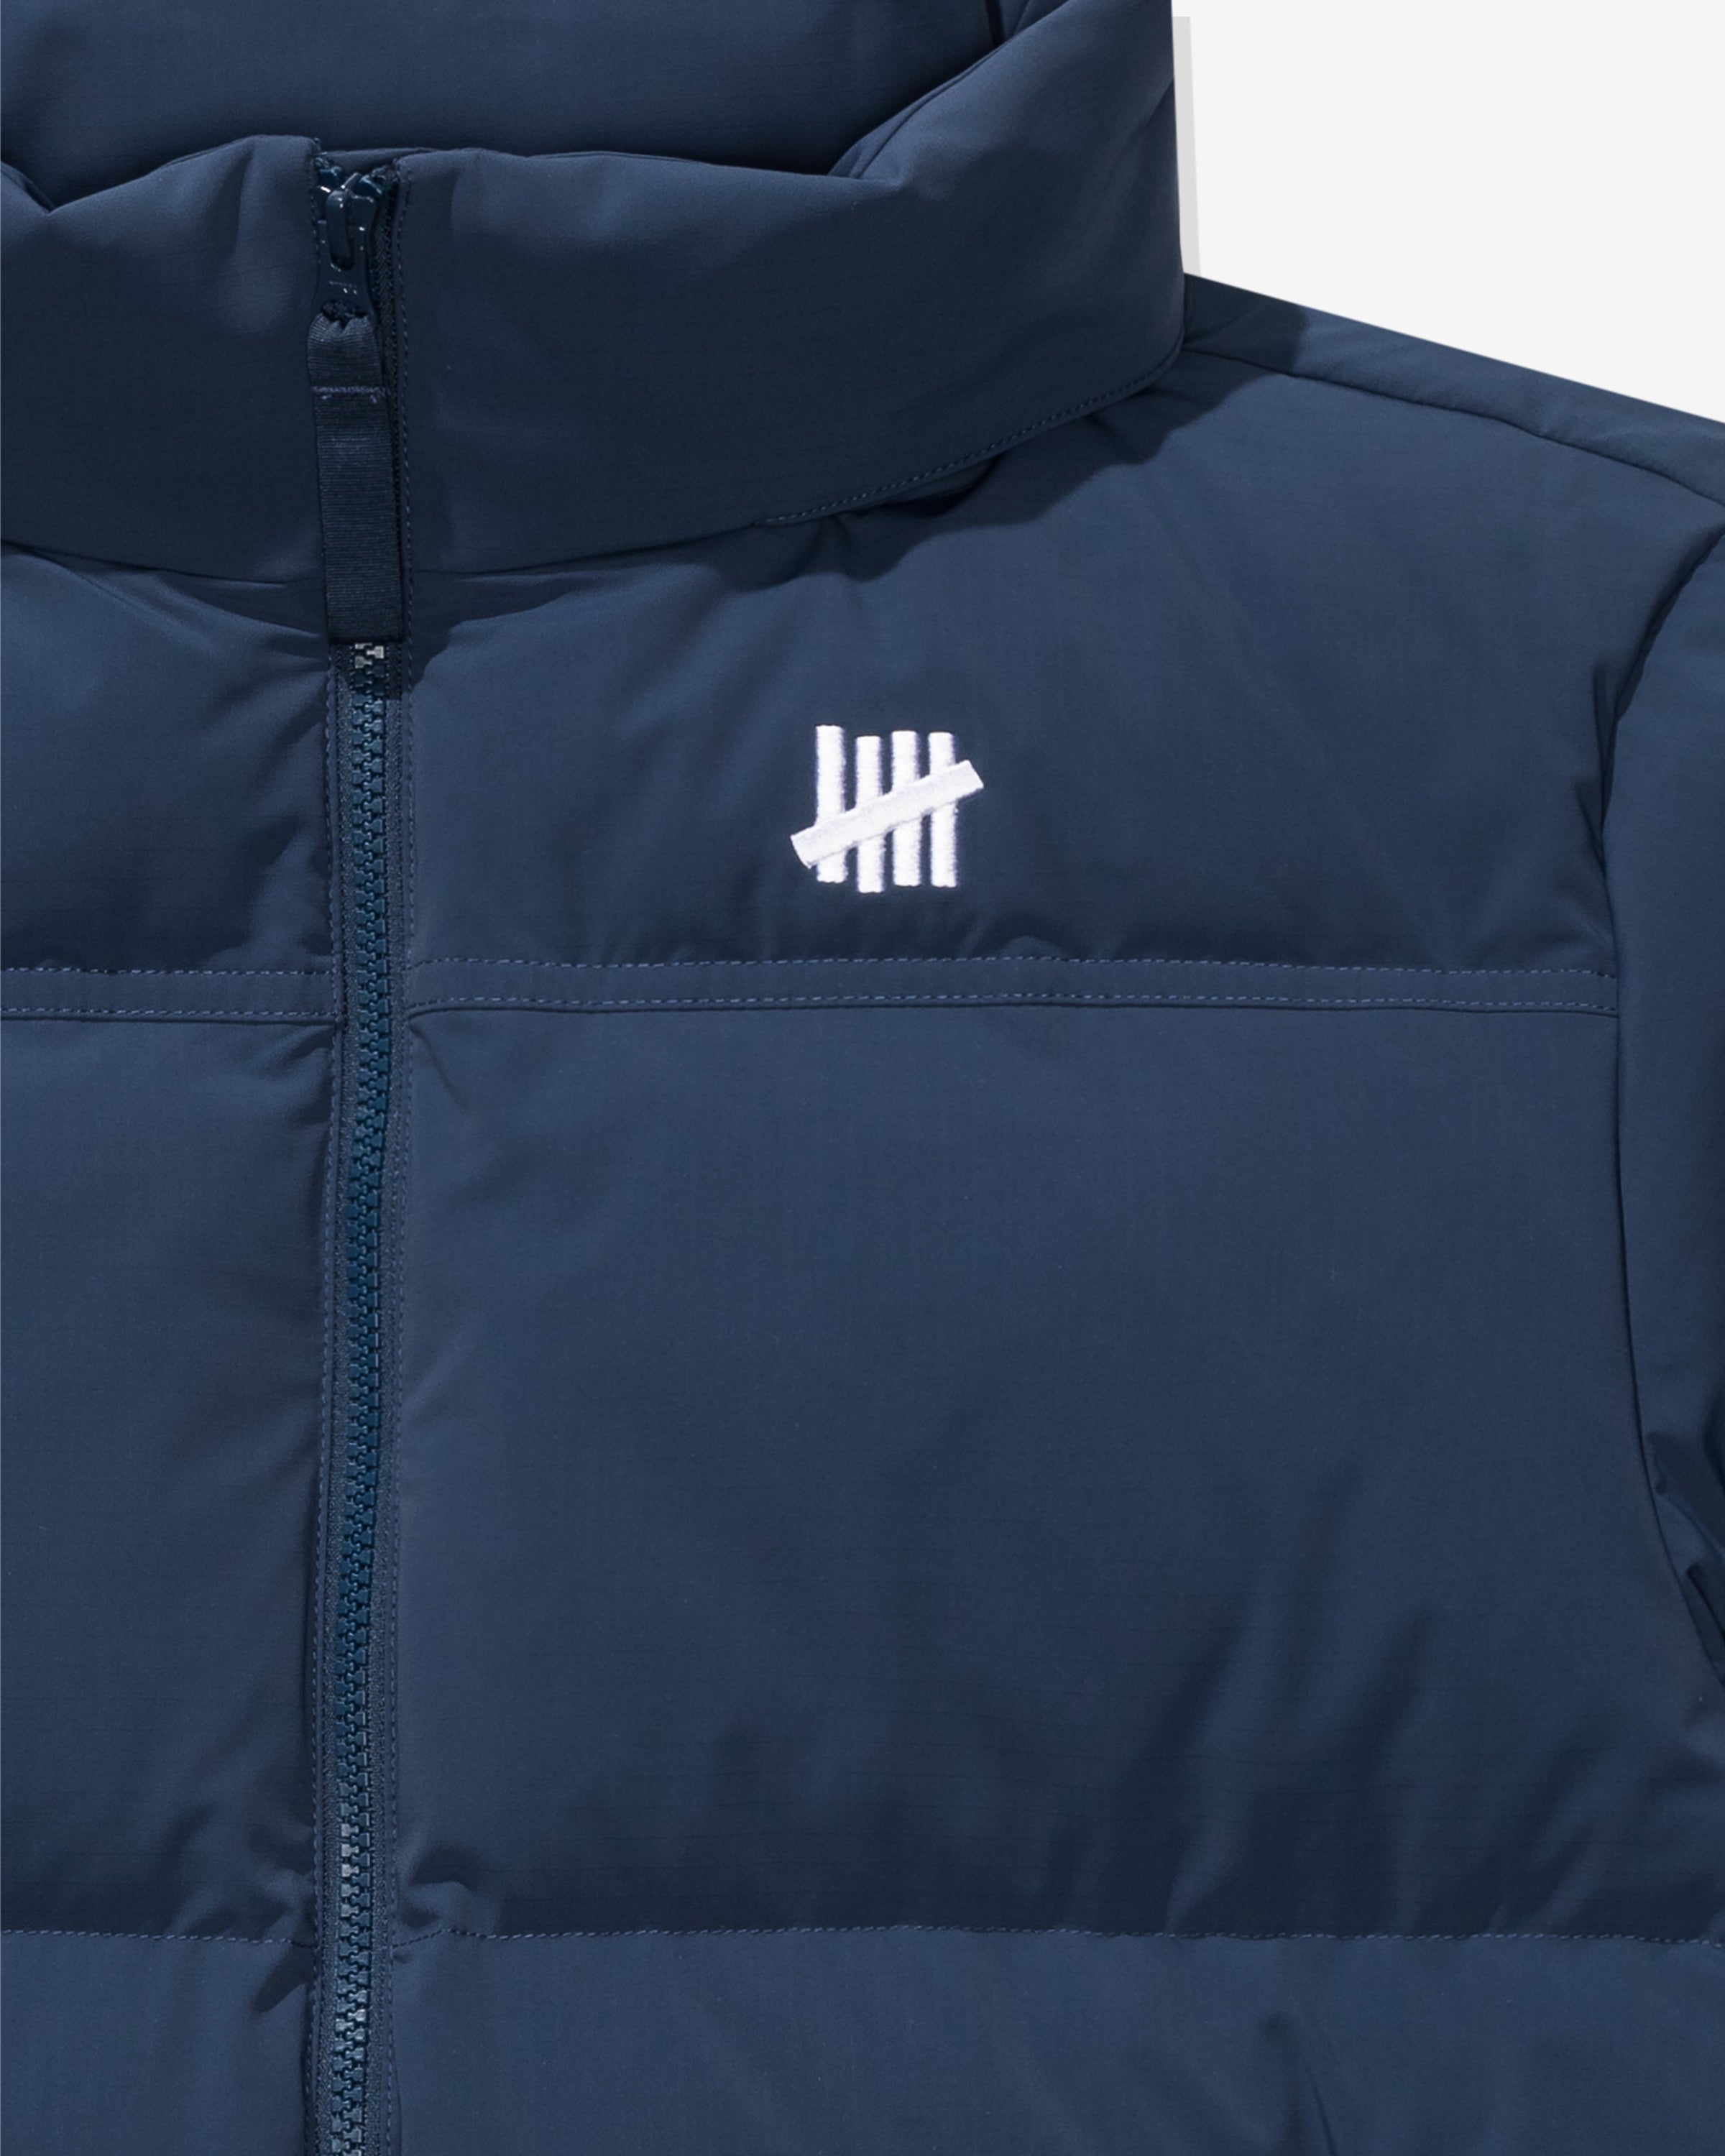 UNDEFEATED DOWN JACKET – Undefeated